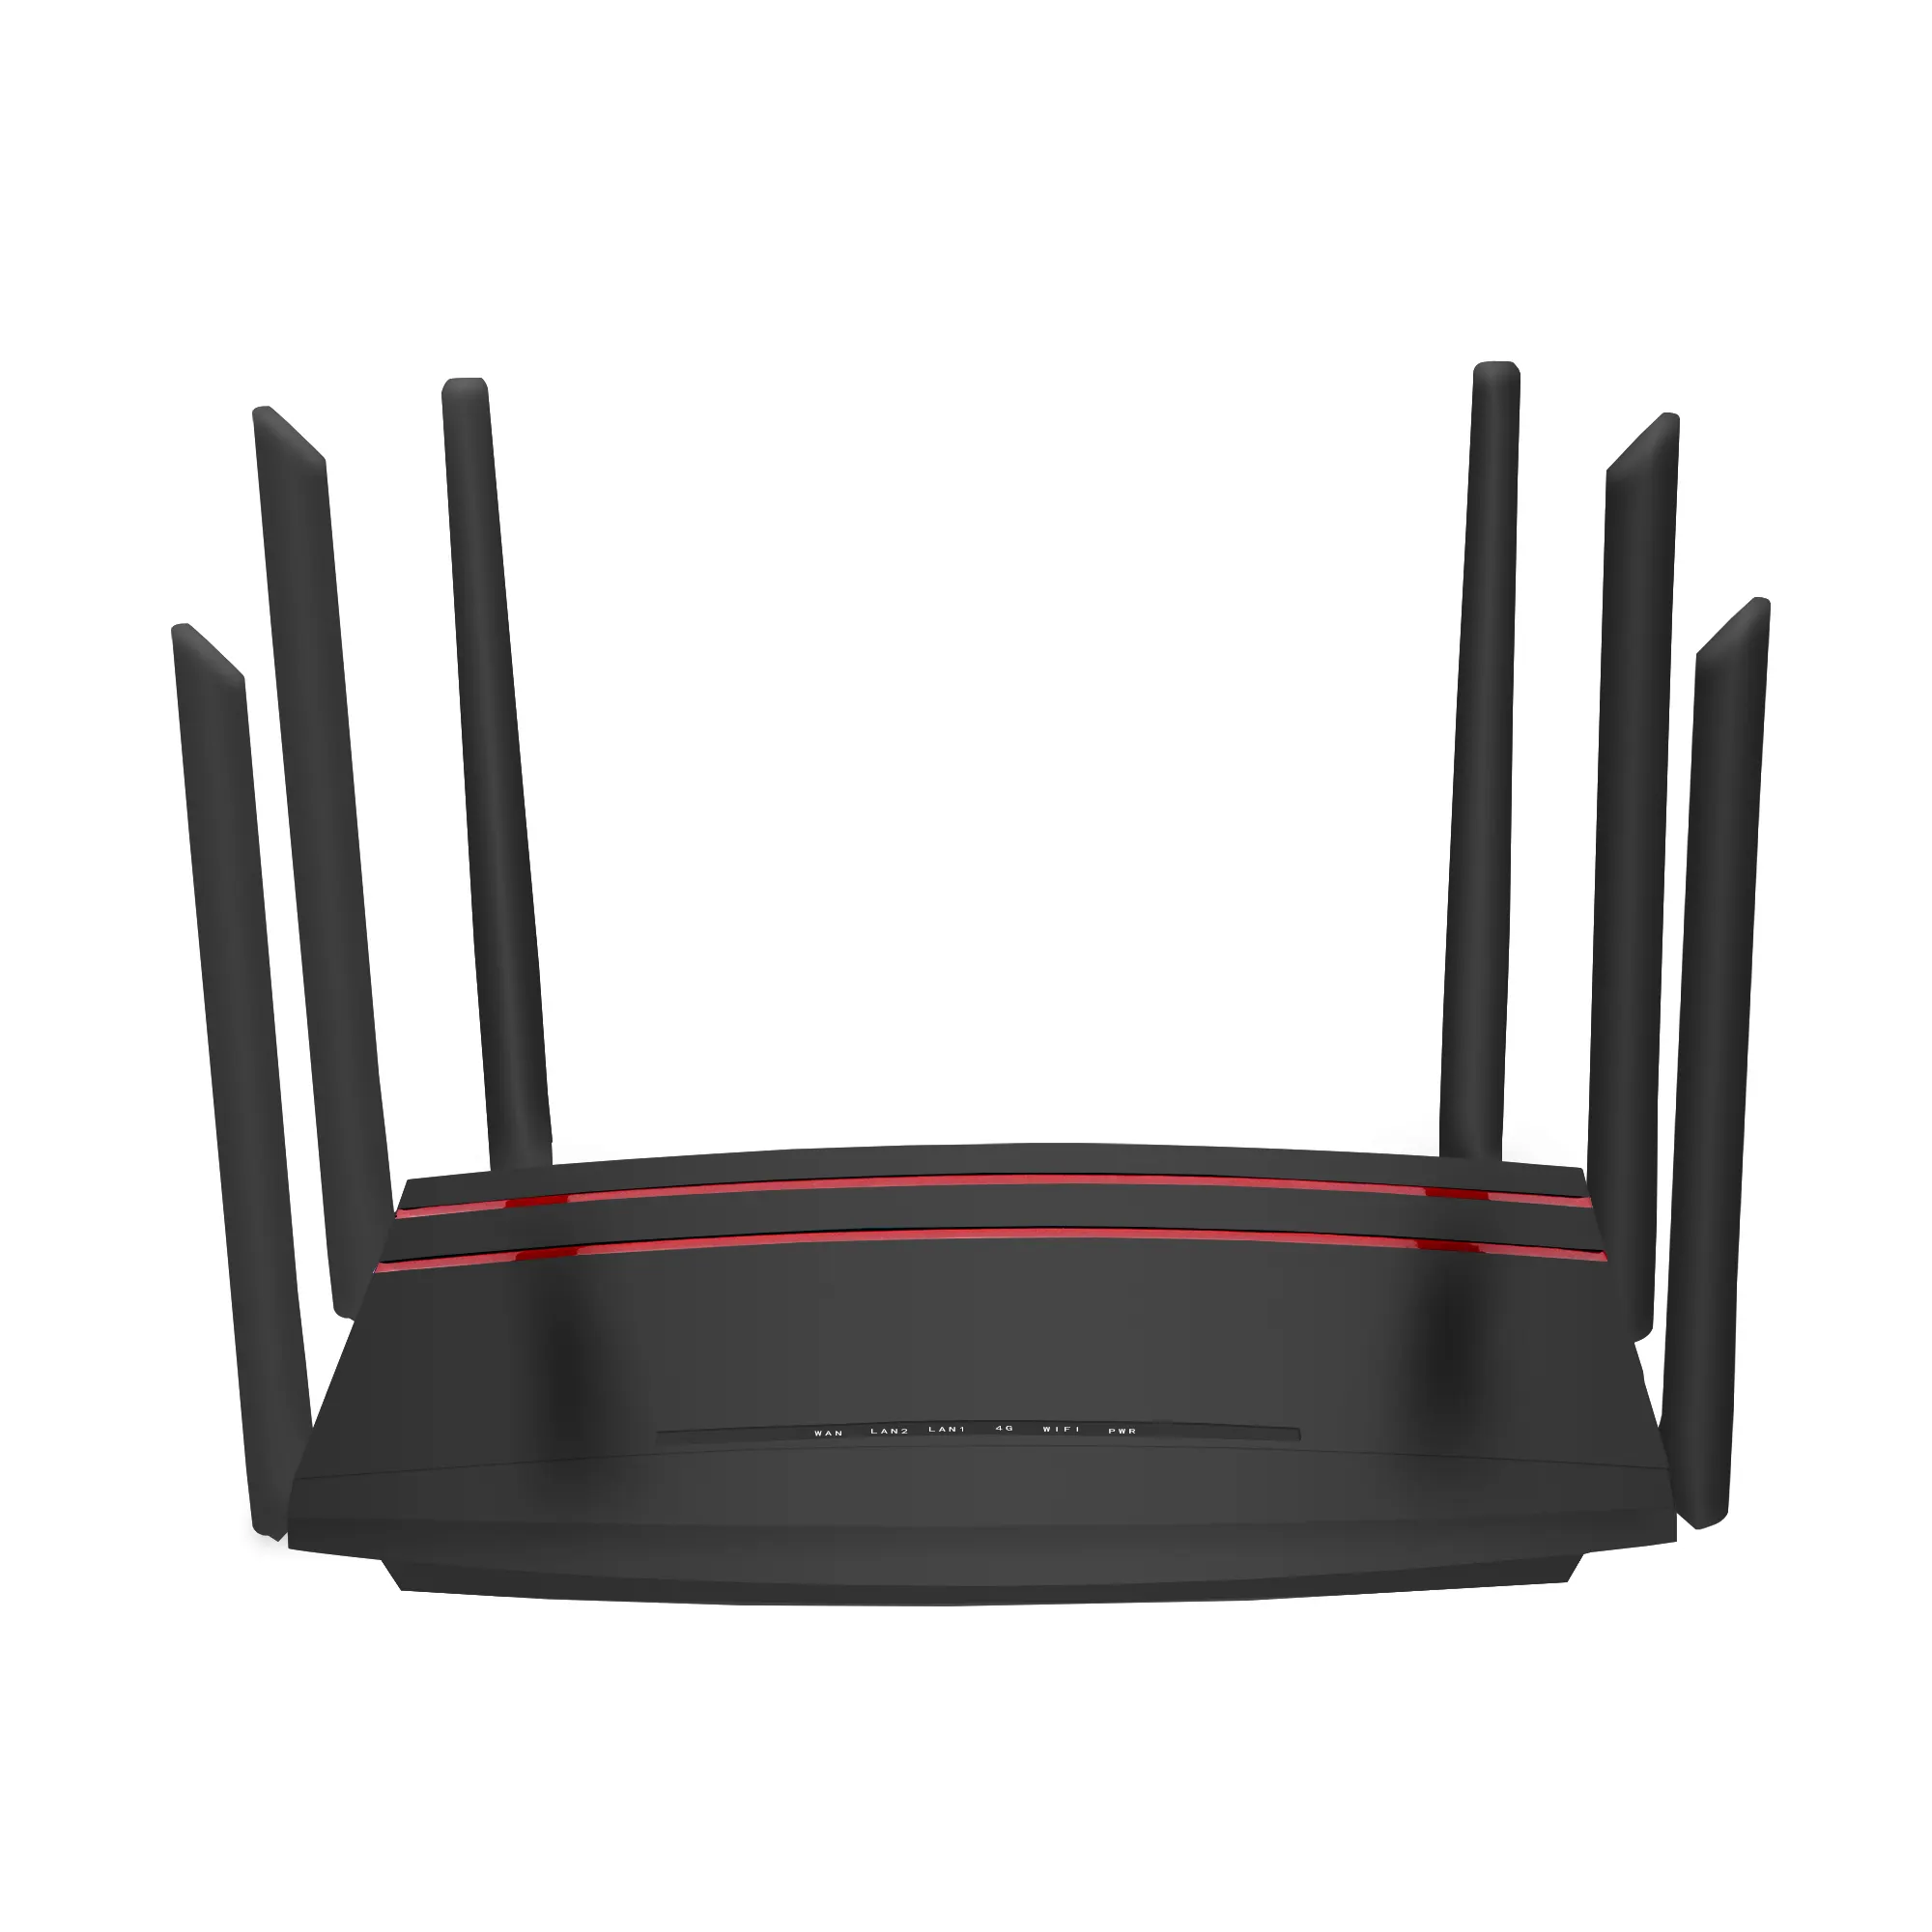 Wireless 4G Router Hi Link 6 antenna Wifi Router Module Max Status Antenna Work Data Multi Rod Origin Type Rate Ghz Products